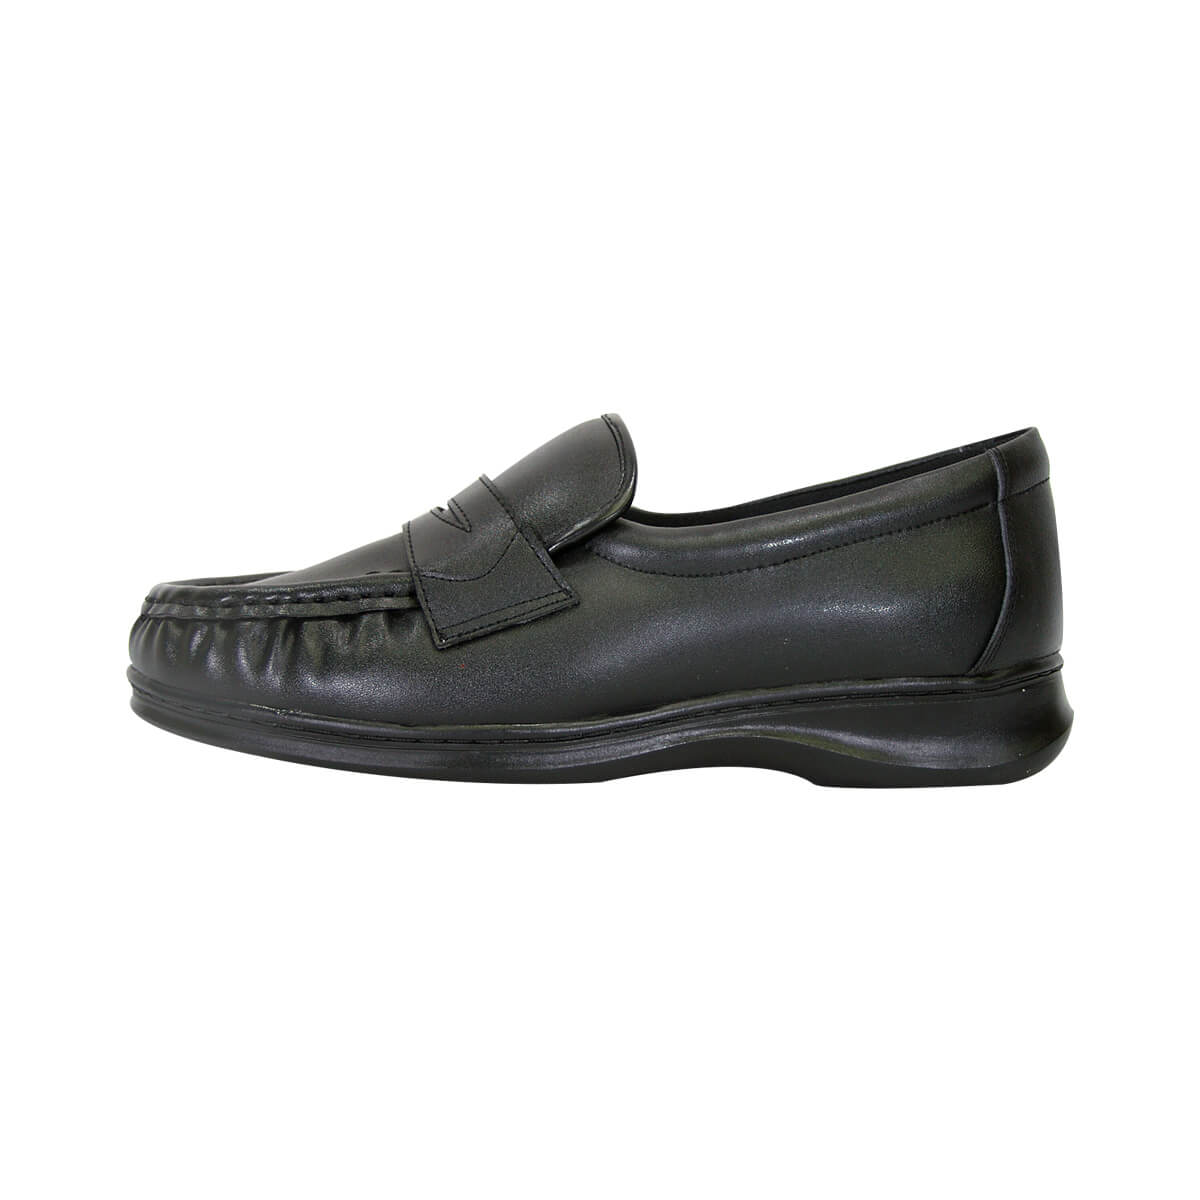 24 HOUR COMFORT Annie Women's Wide Width Penny Loafers